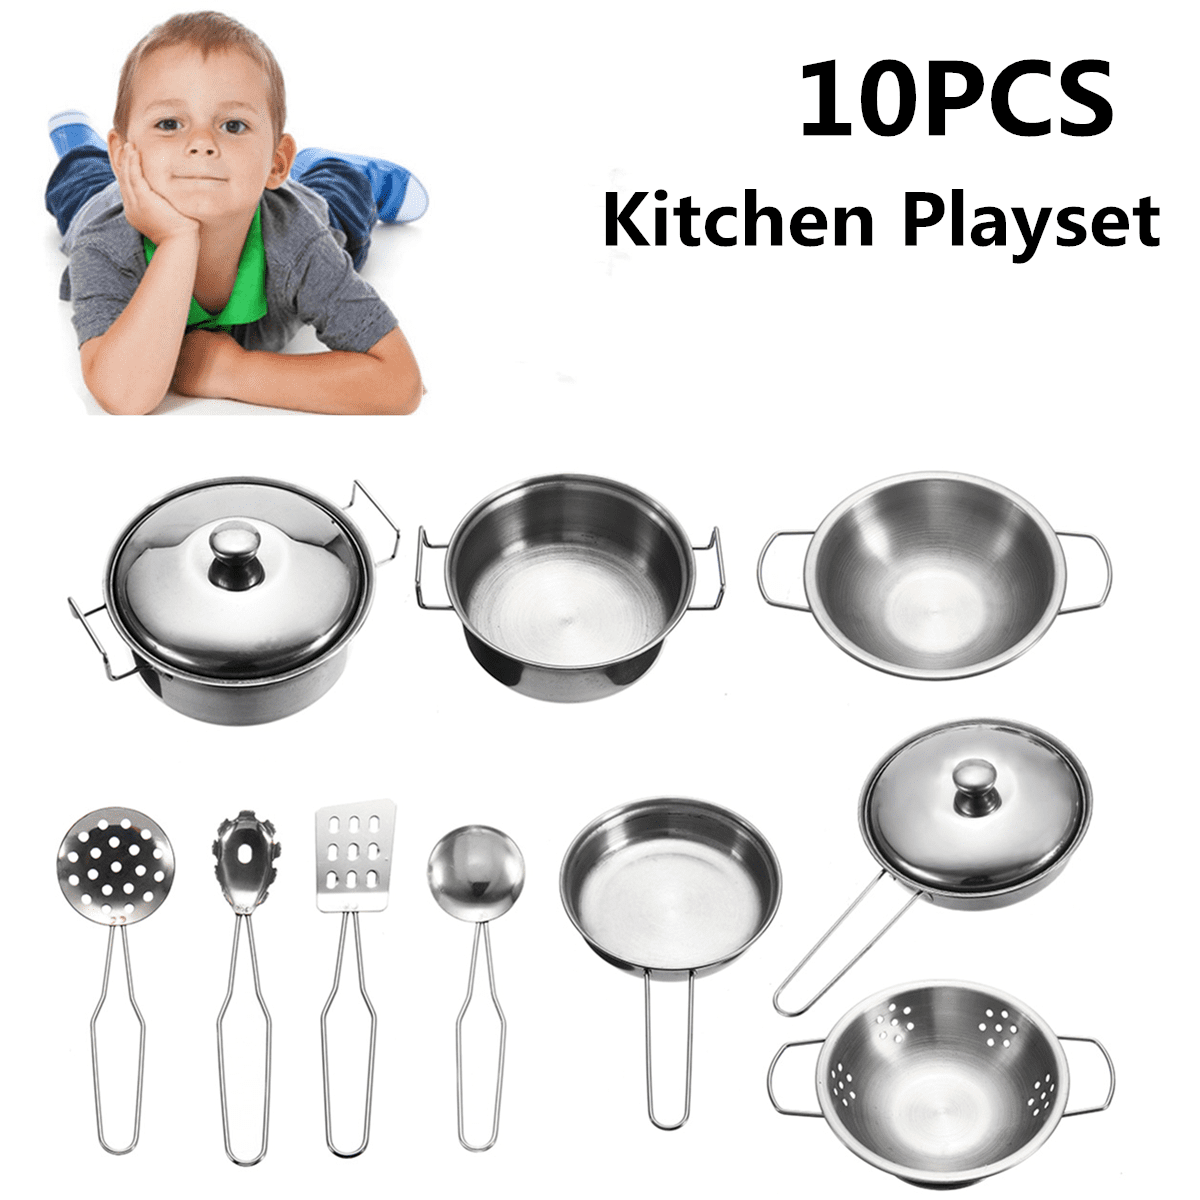 Kids Kitchen Playsets Fun Learning Toys Stainless Steel Pots Pans Pretend Play 